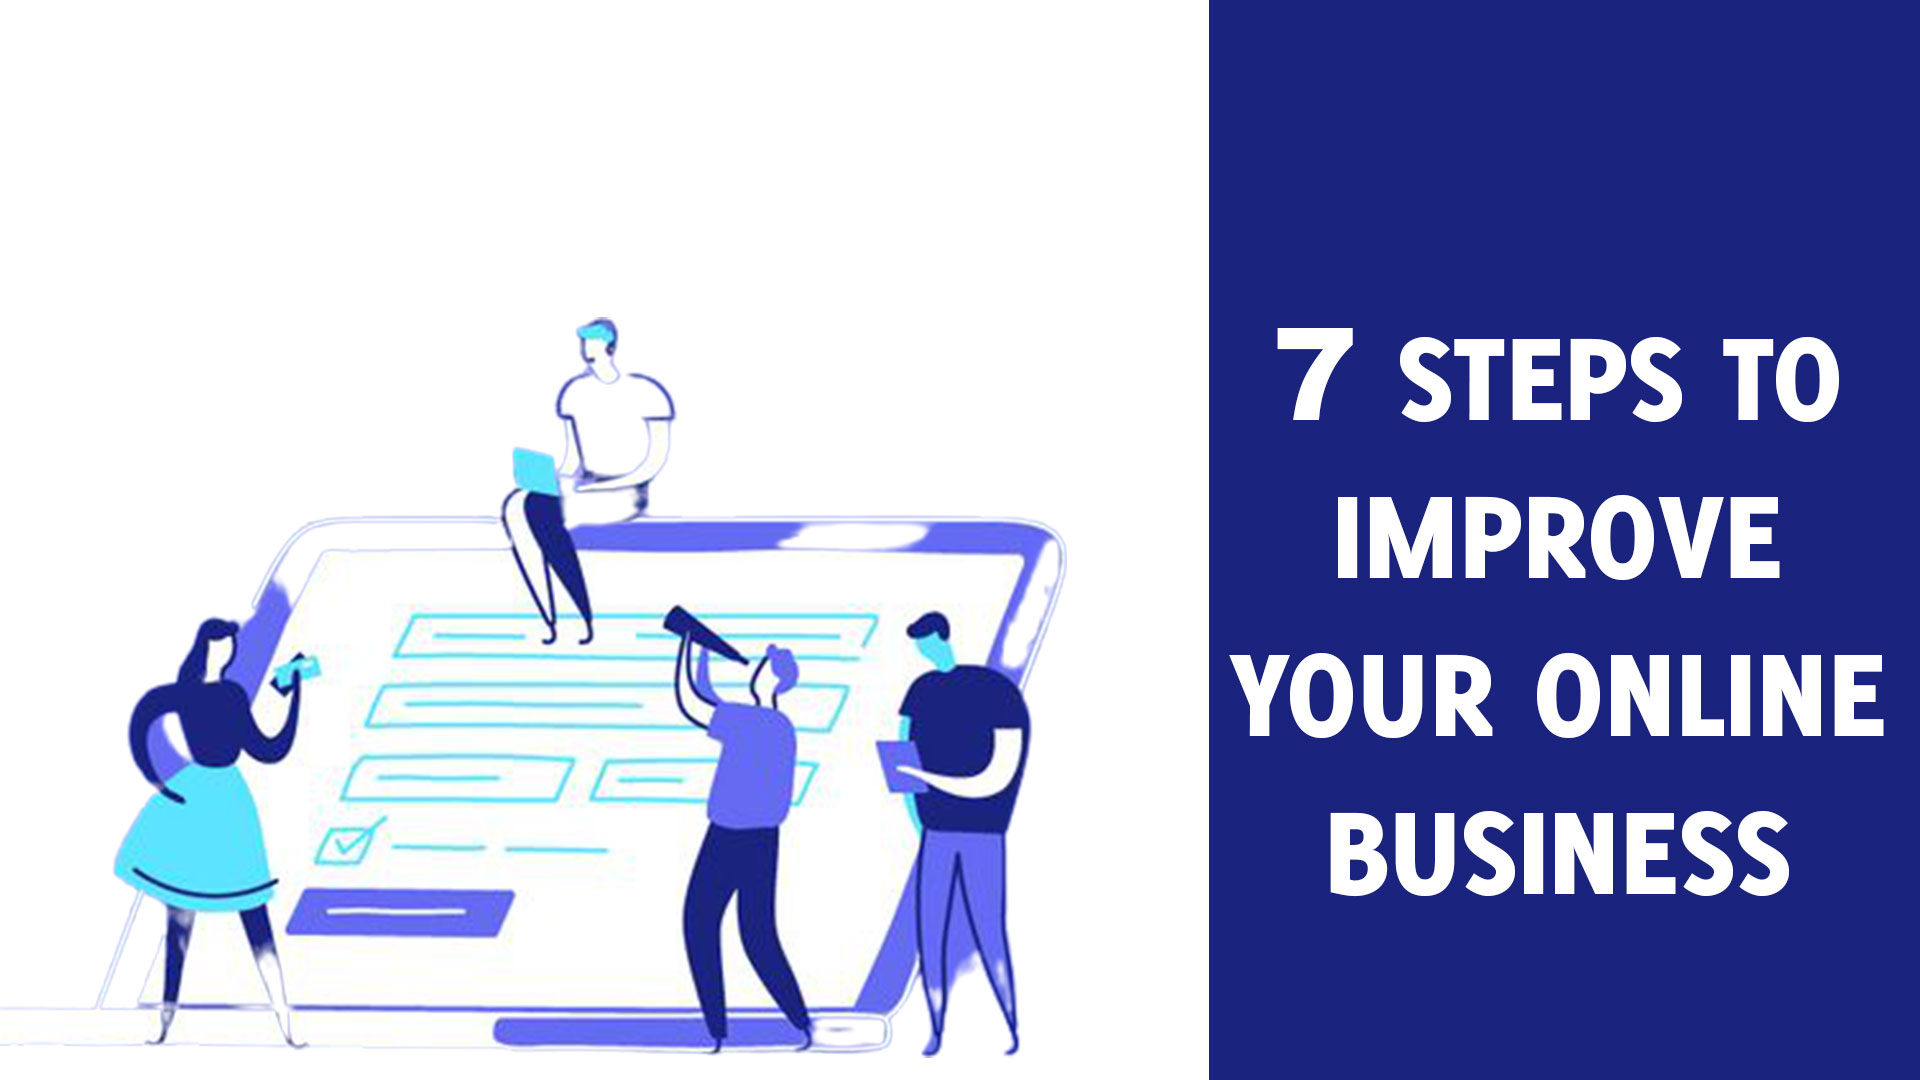 7-STEPS-TO-IMPROVE-YOUR-ONLINE-BUSINESS